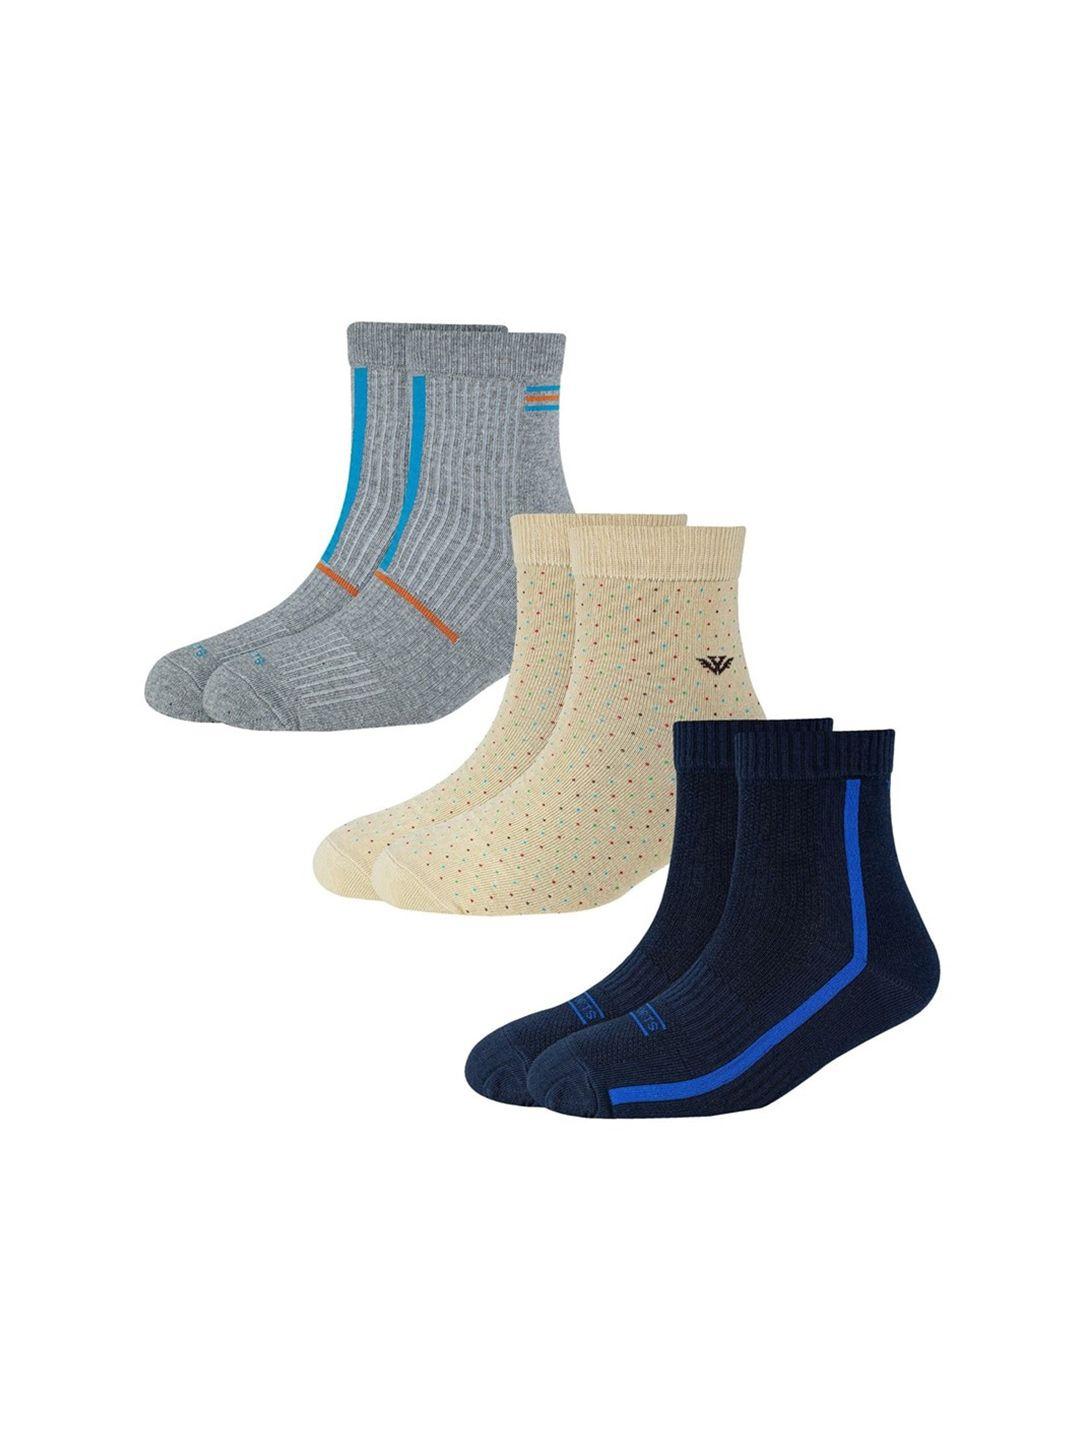 cotstyle pack of 3 anti-bacterial ankle-length socks